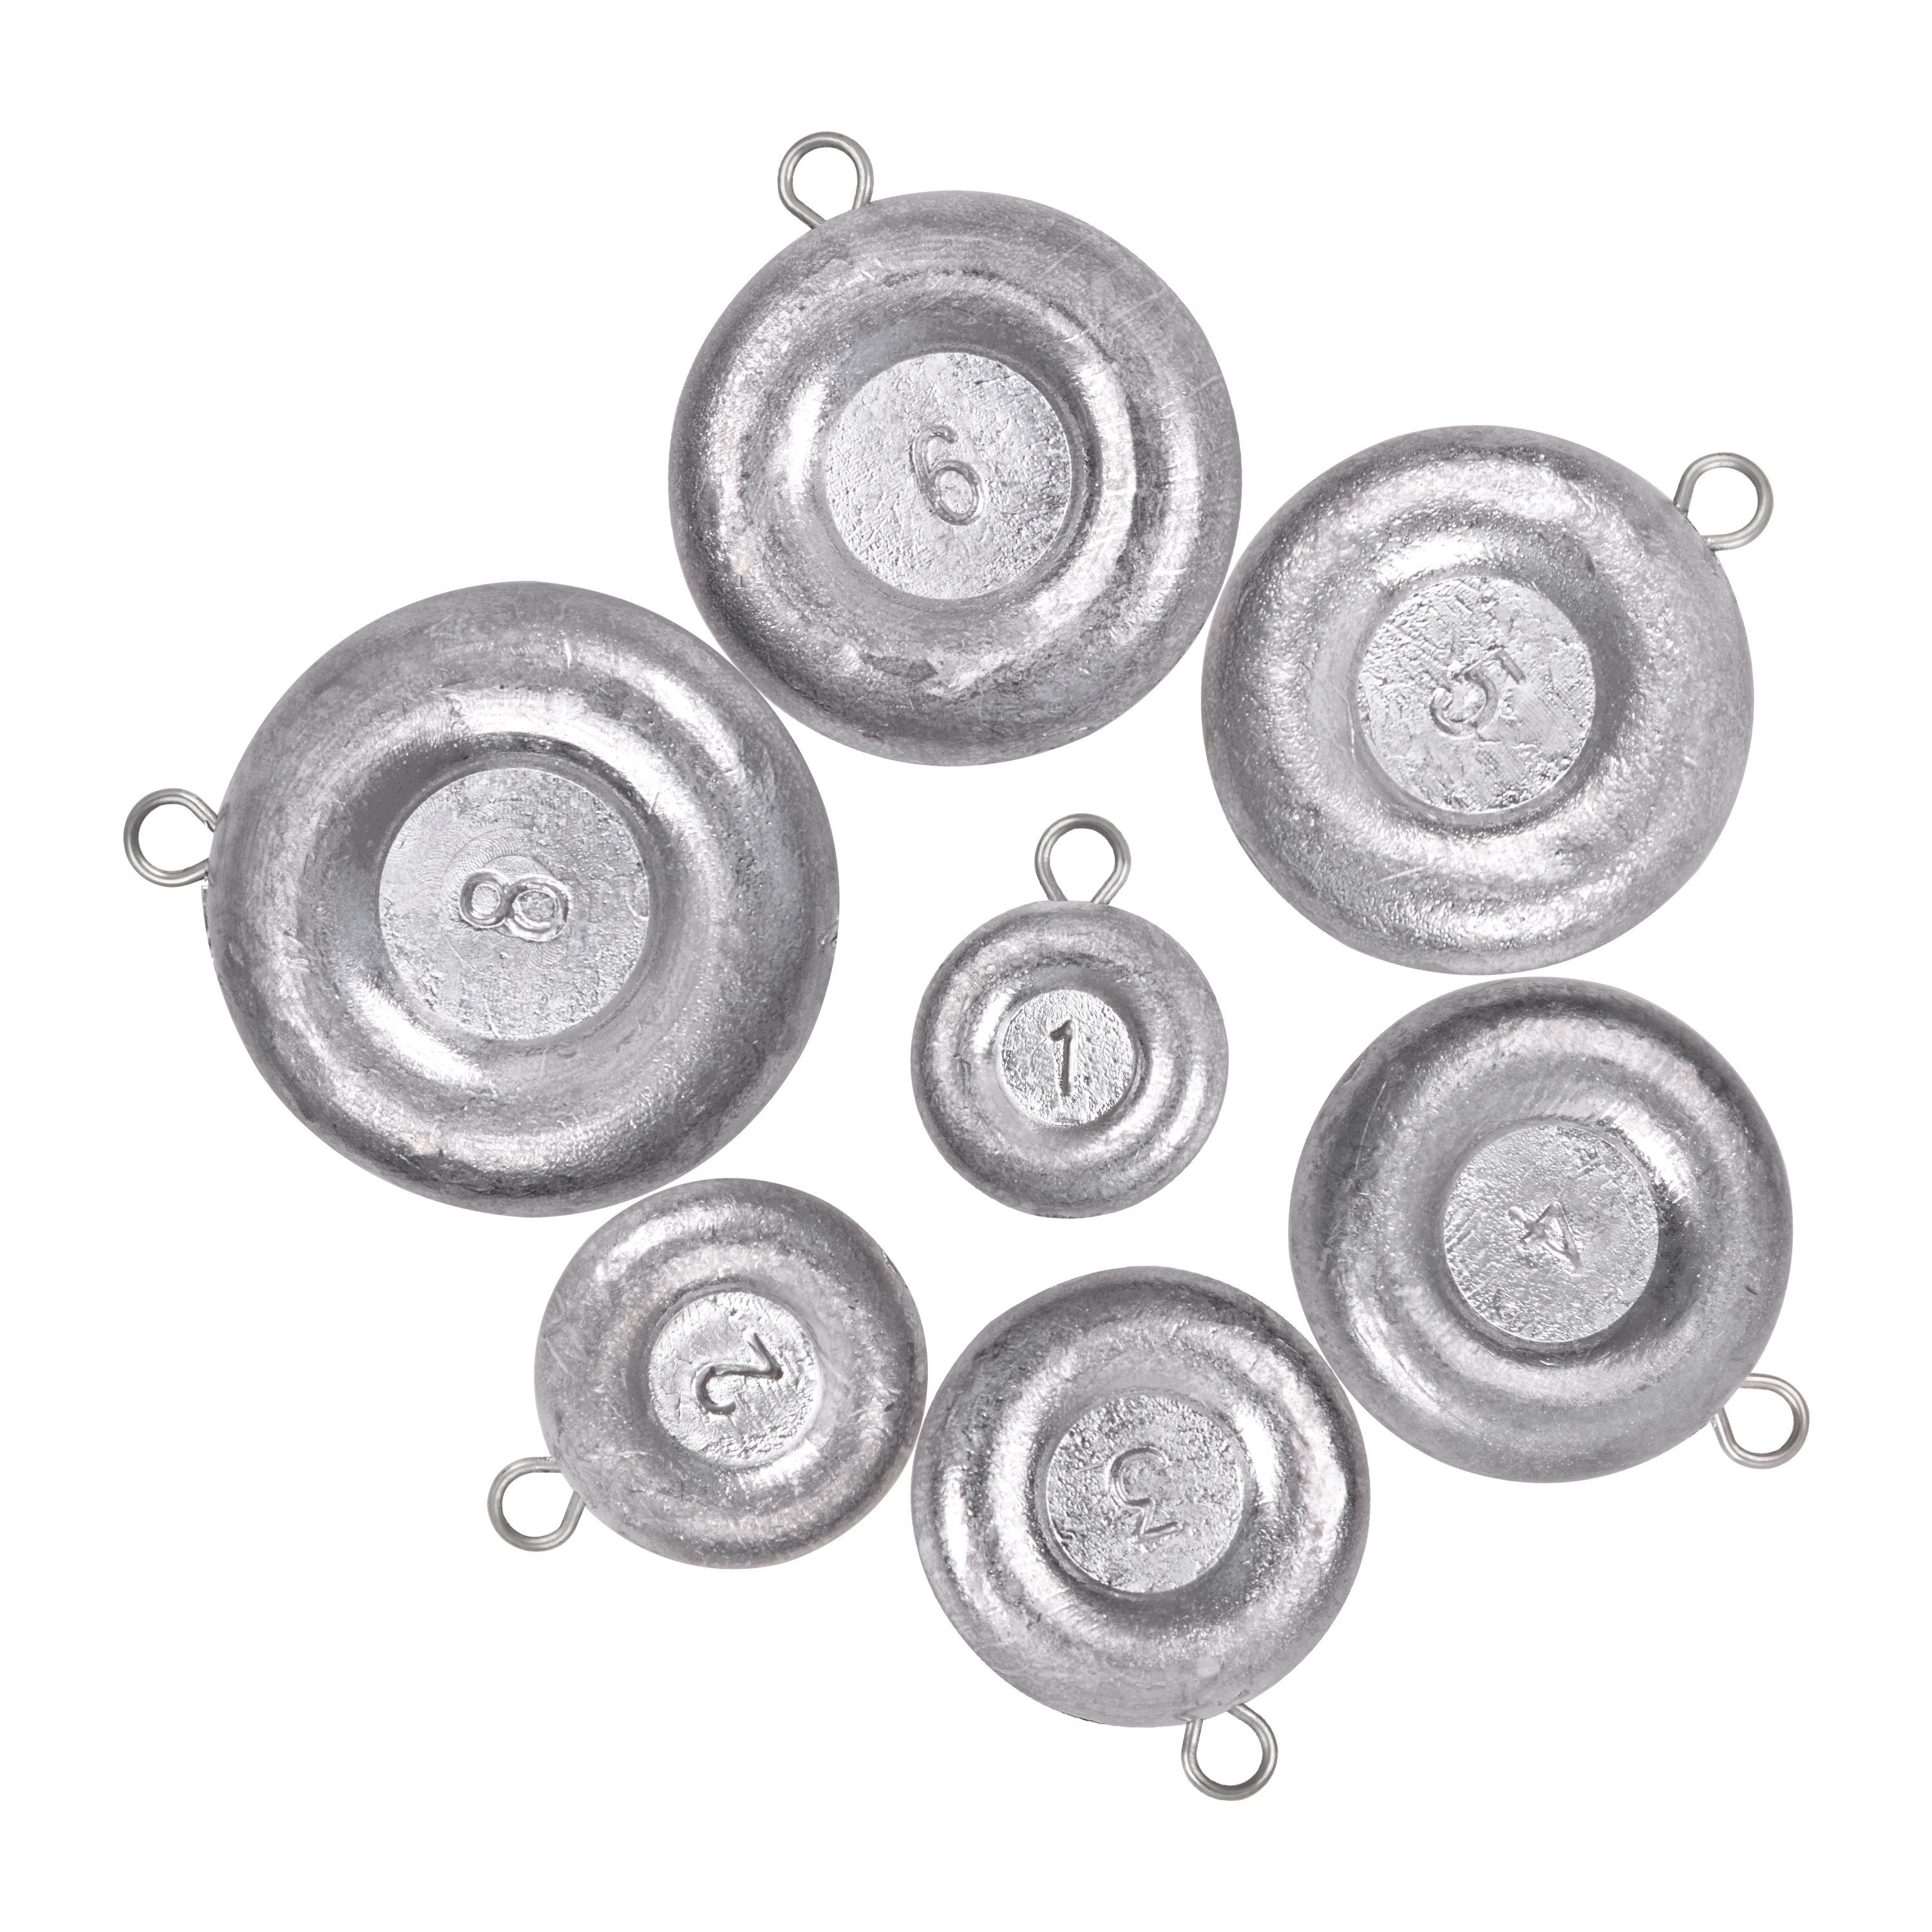 25 of 8 oz Flat round coin River Sinkers – Lead Fishing Weights